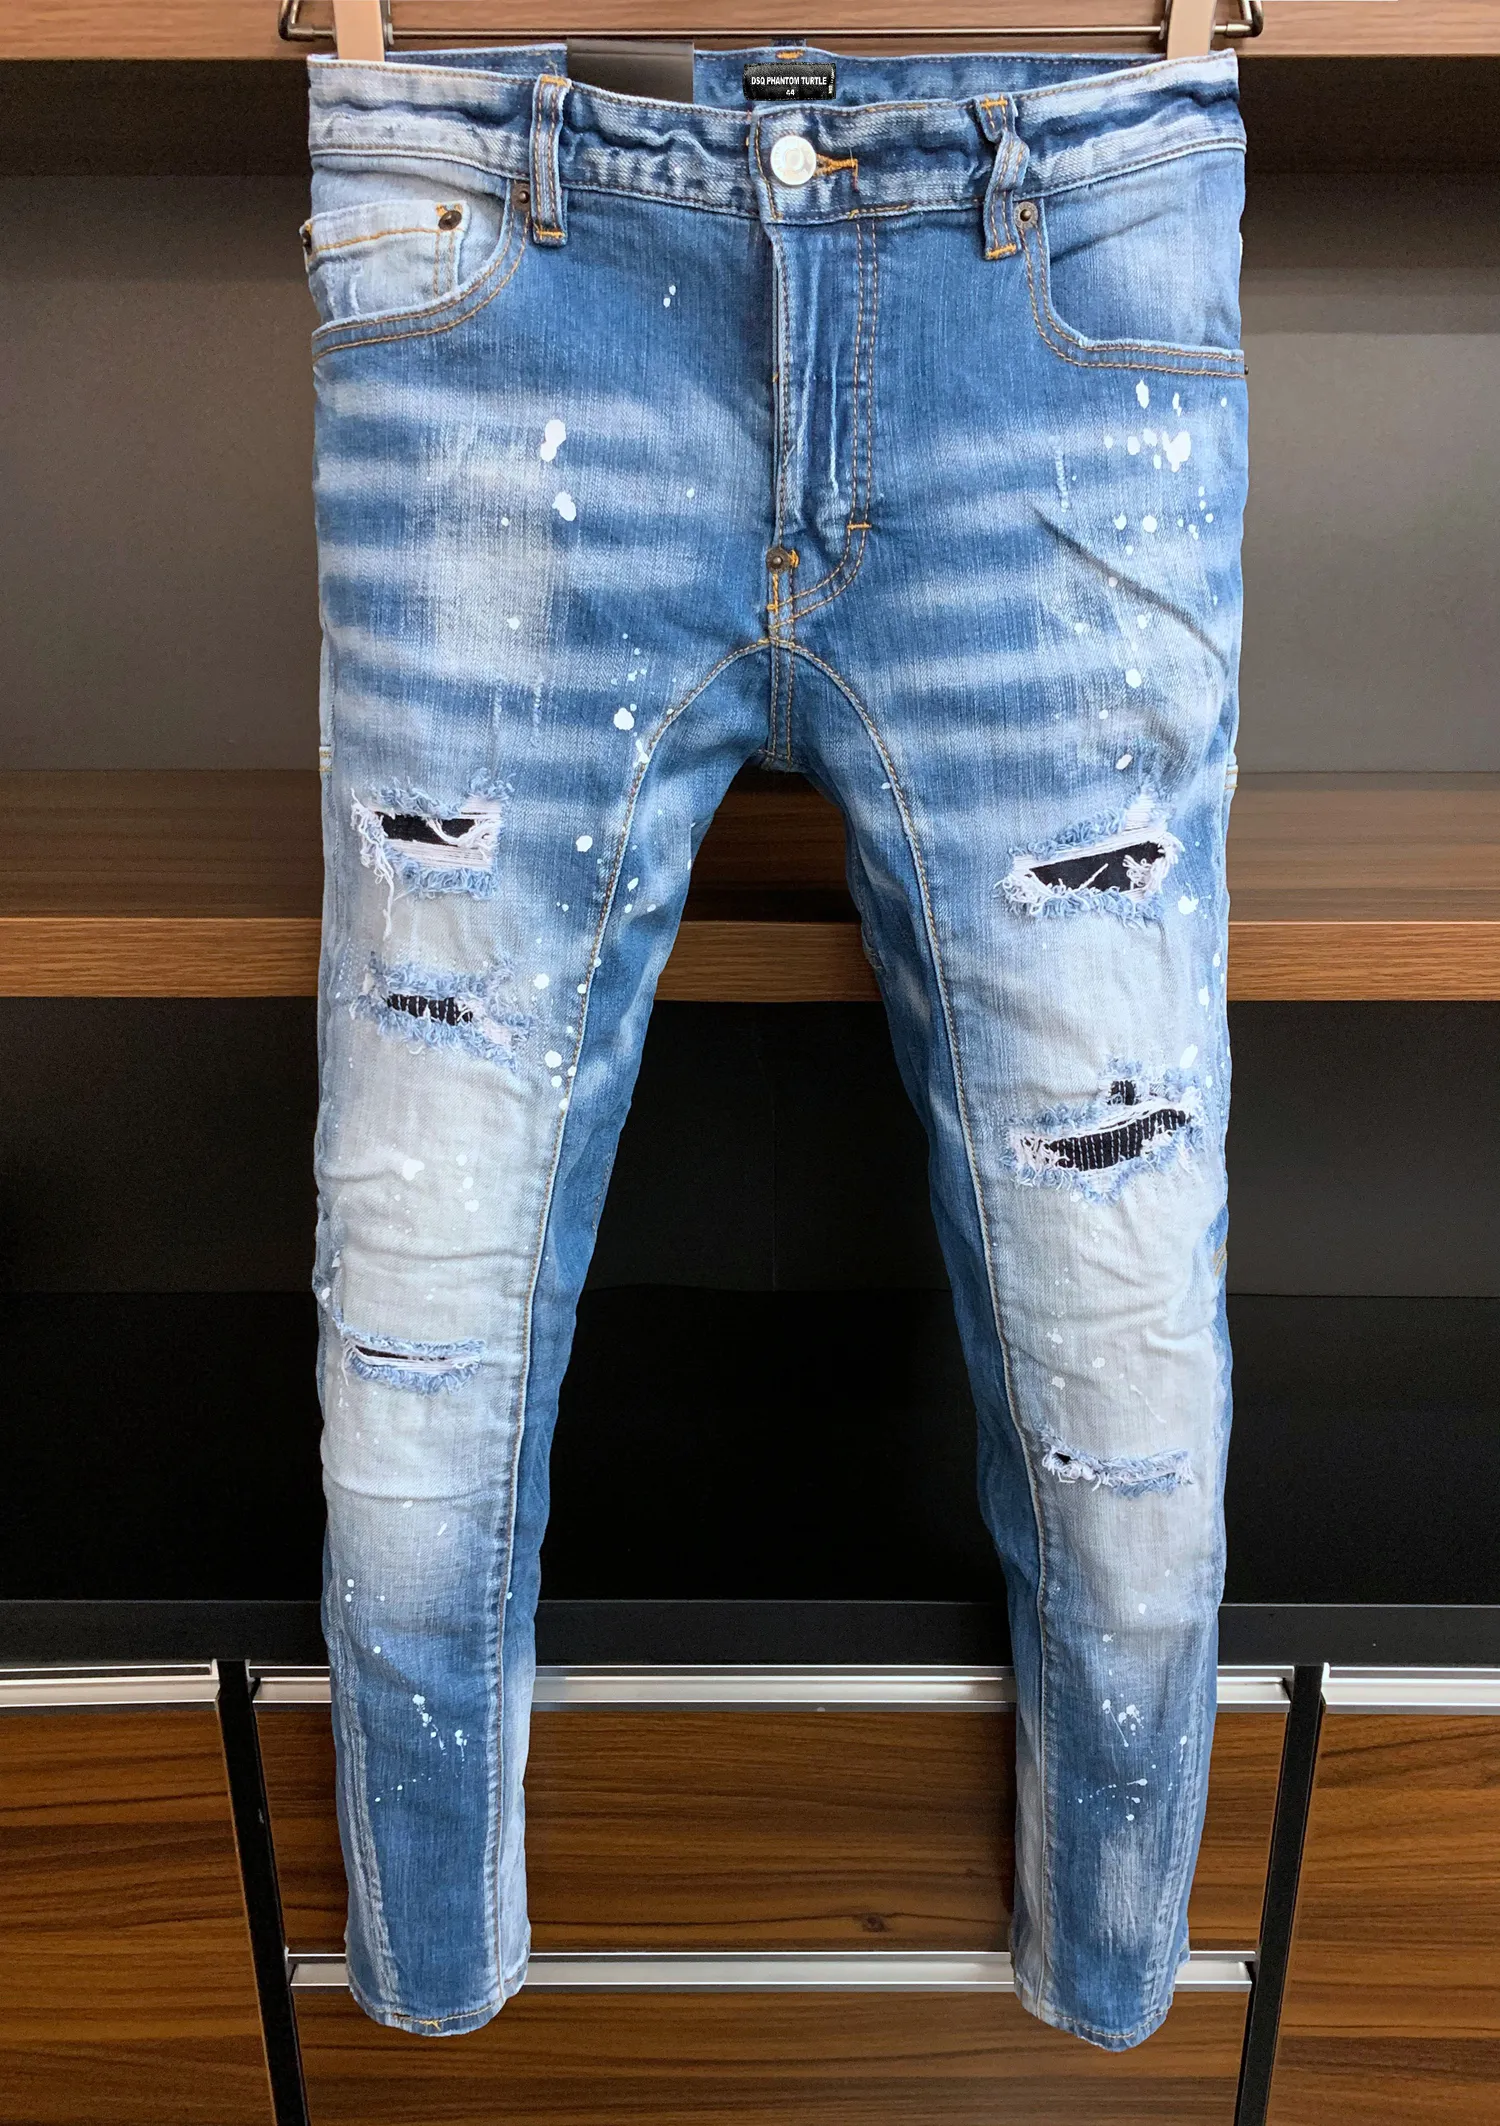 DSQ PHANTOM TURTLE Men's Jeans Mens Luxury Designer Jeans Skinny Ripped Cool Guy Causal Hole Denim Fashion Brand Fit Jeans Men Washed Pants 61173